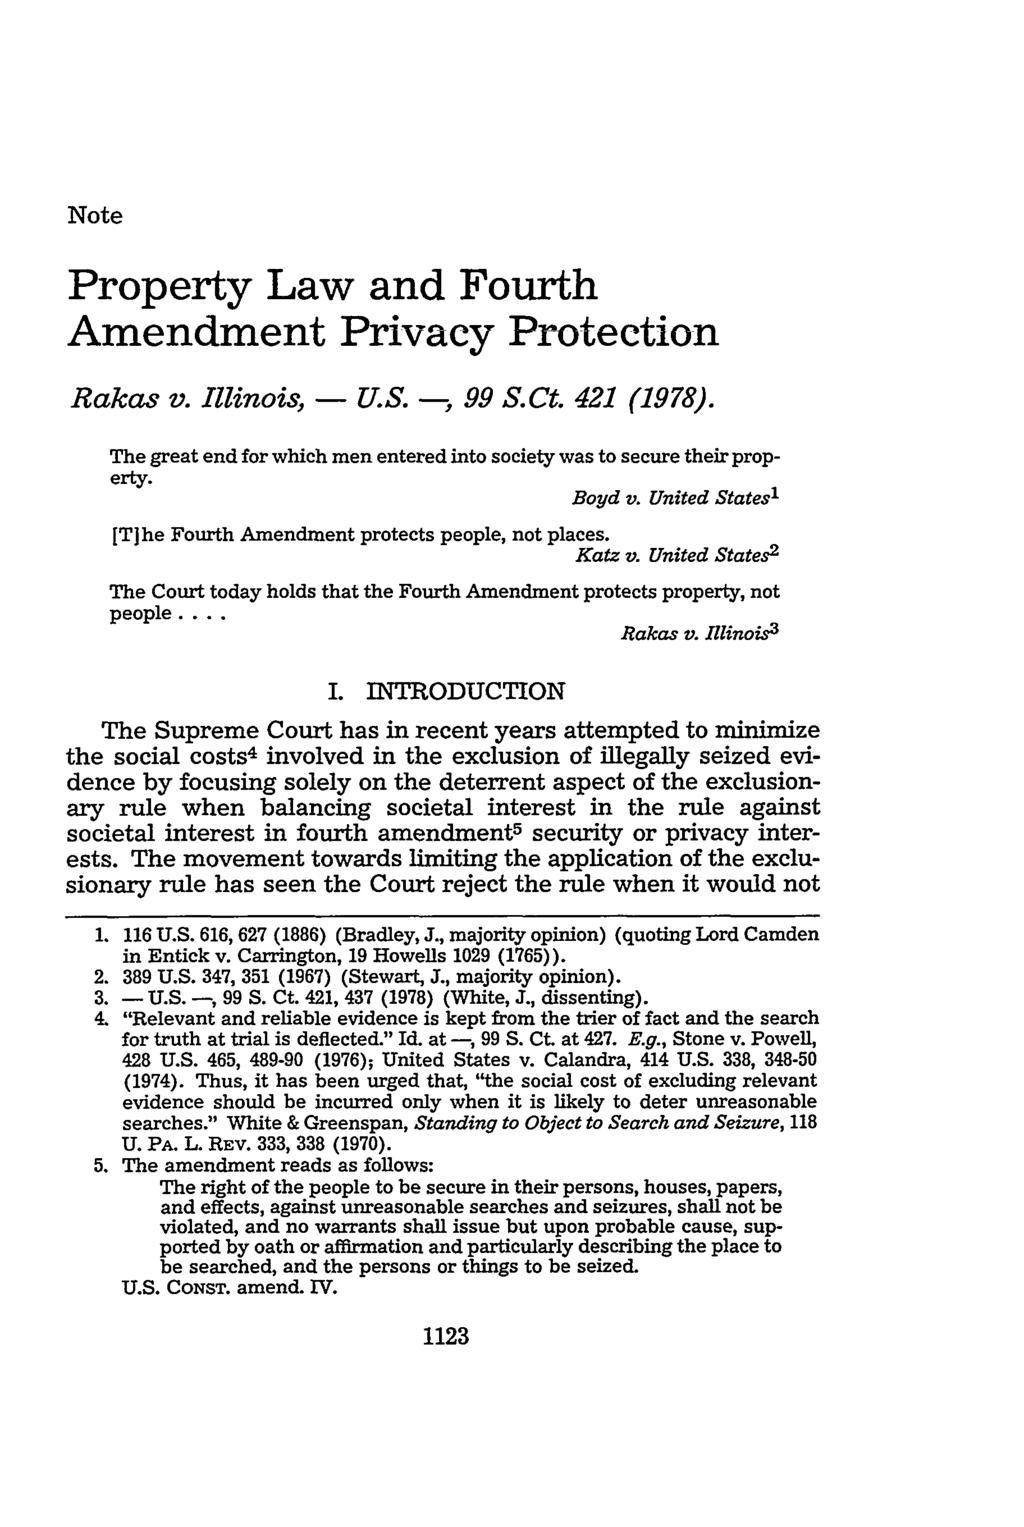 Note Property Law and Fourth Amendment Privacy Protection Rakas v. Illinois, - U.S. -, 99 S.Ct. 421 (1978). The great end for which men entered into society was to secure their property. Boyd v.